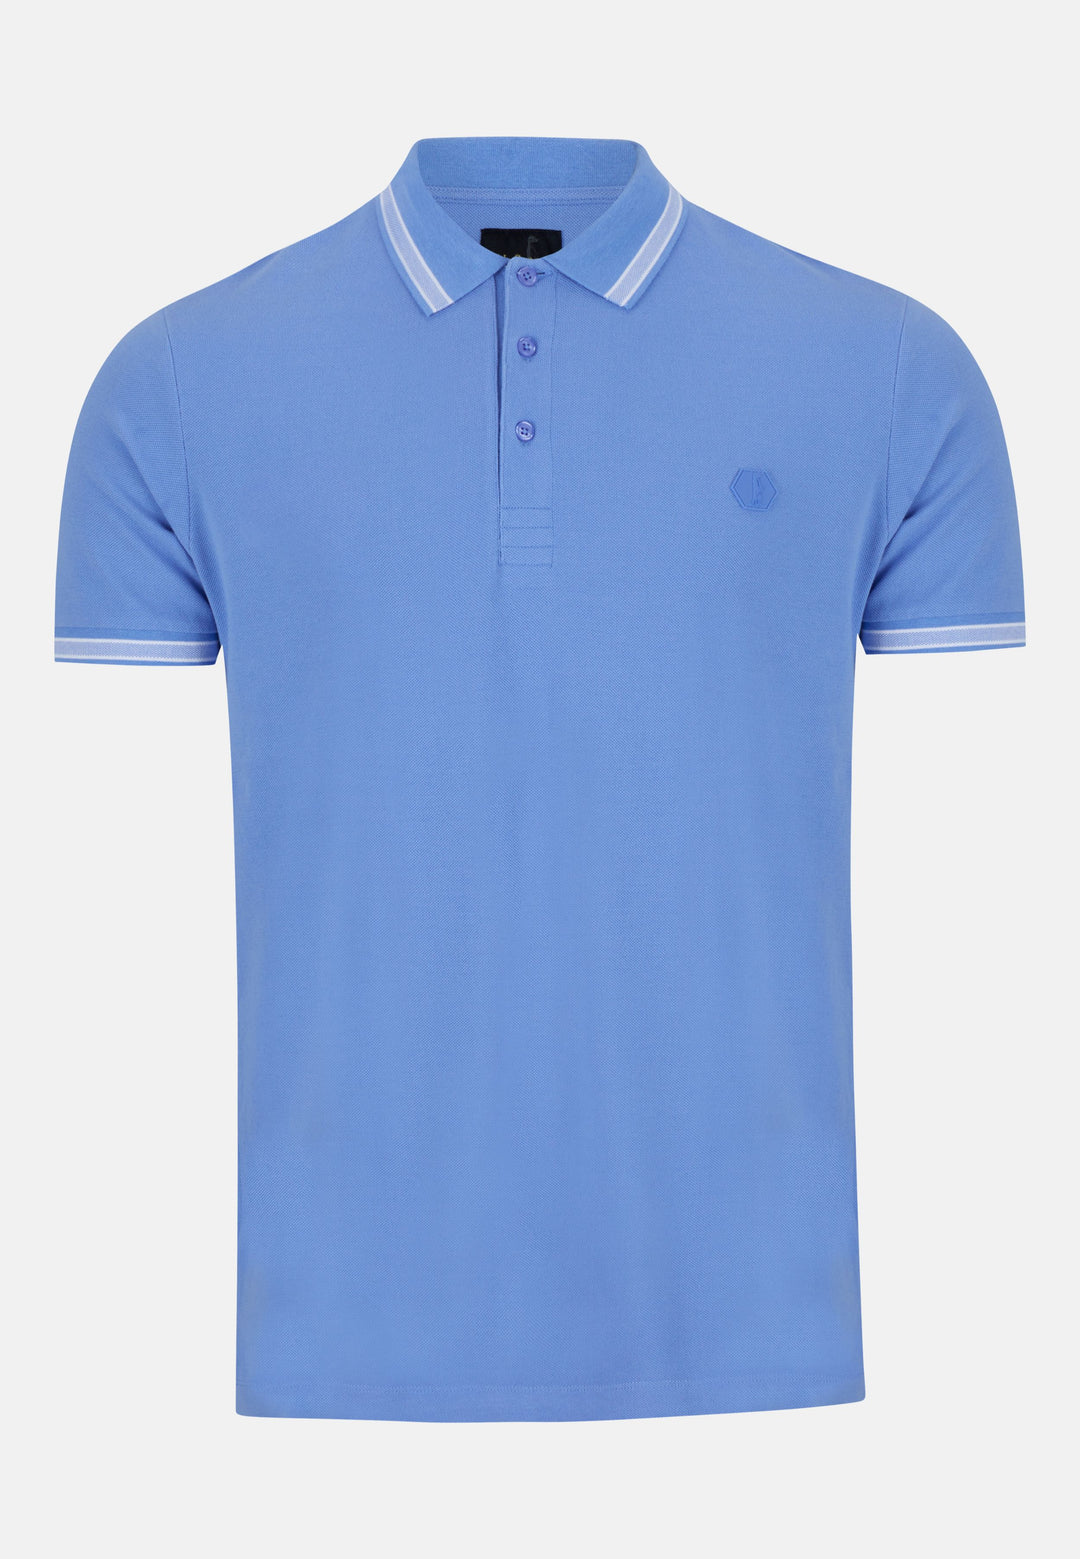 A men's regular-fit Polo Shirt in Light Blue with contrasting white stripe on collar and cuff from 6th Sense's Patrick Polo collection. 